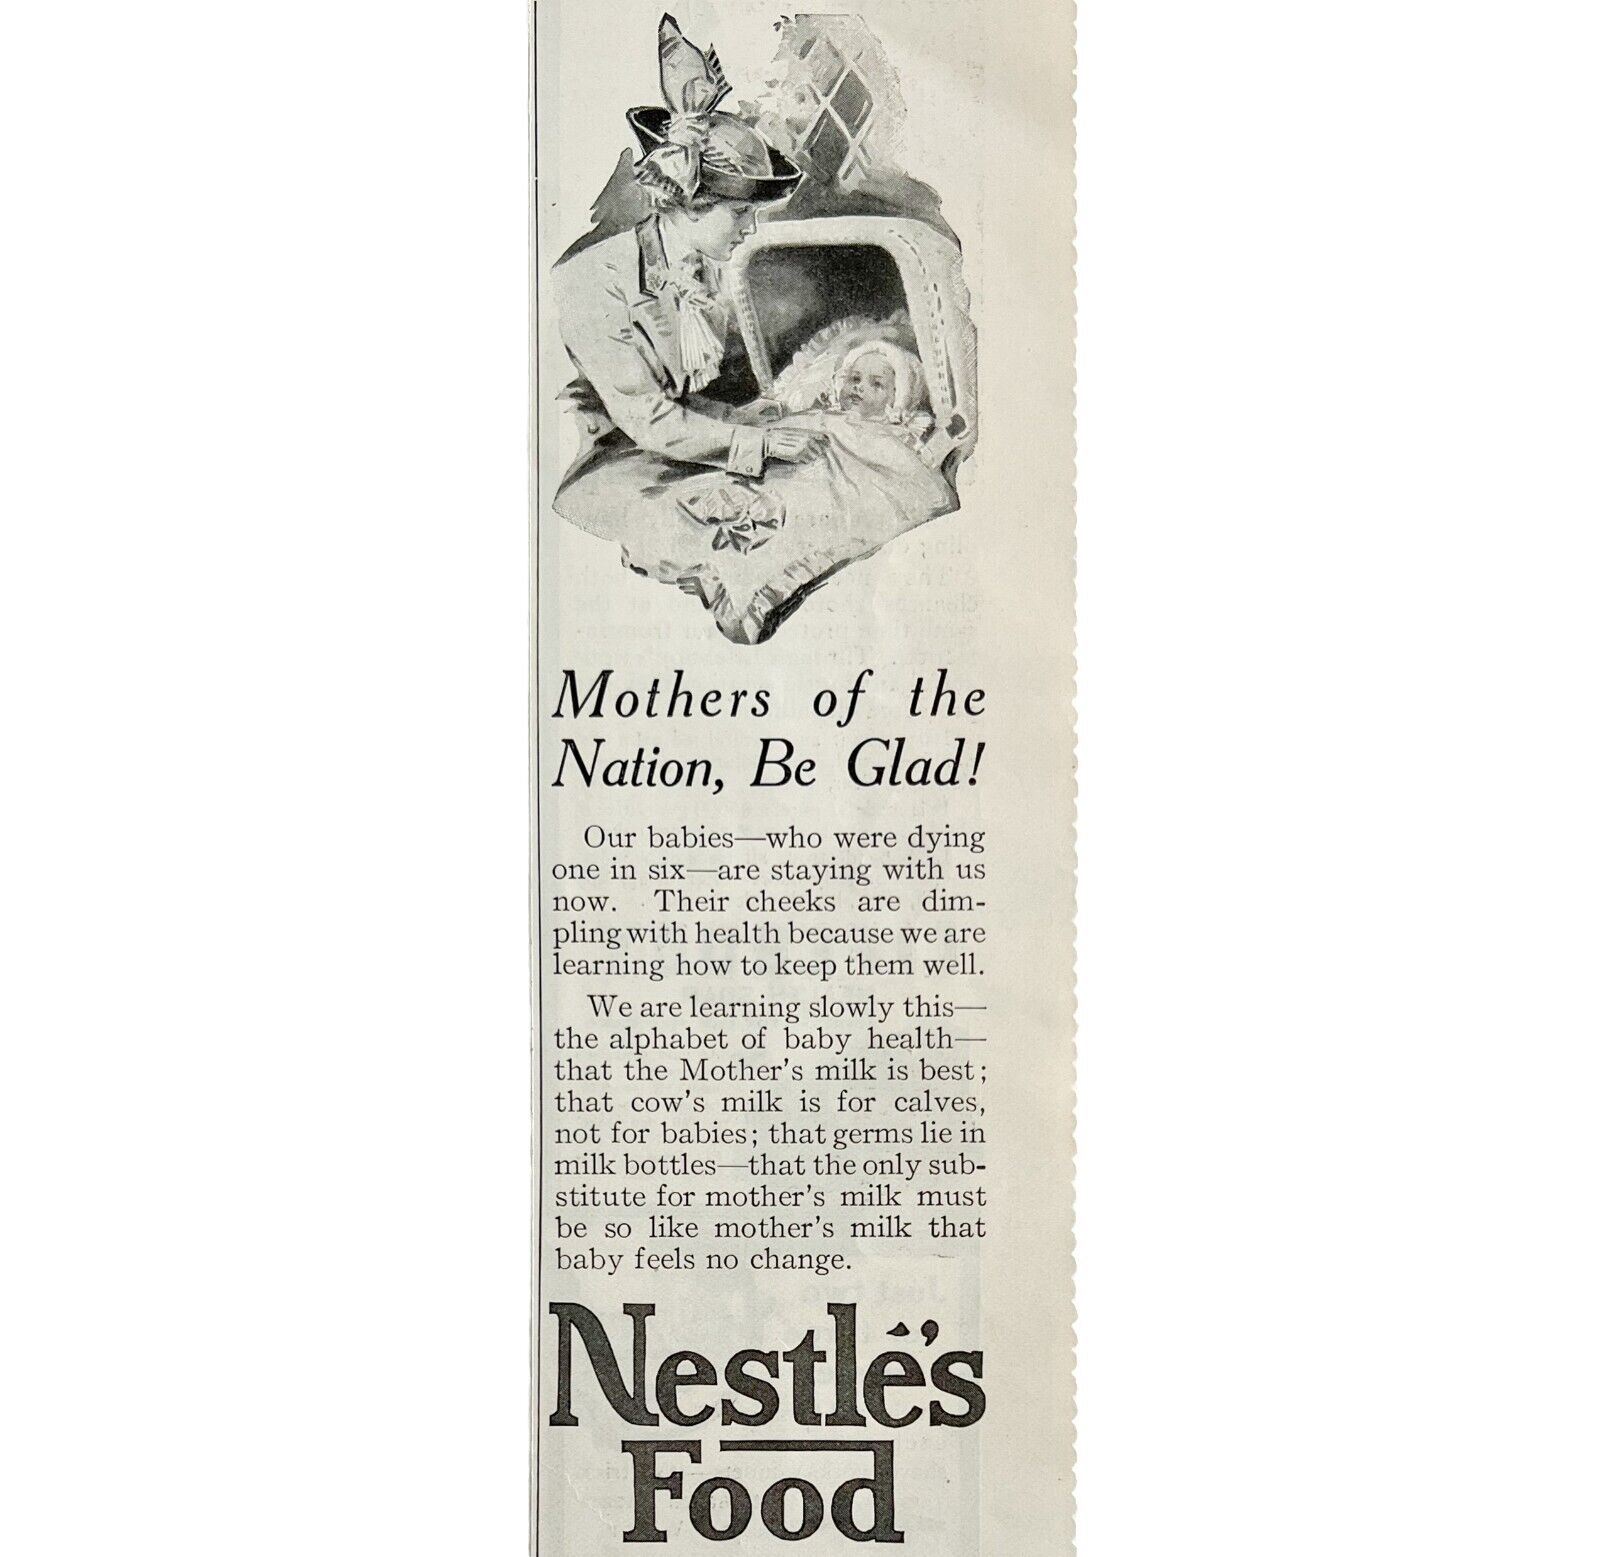 Nestle's Food Powdered Drink Mix 1913 Advertisement Mothers Of The Nation DWII9